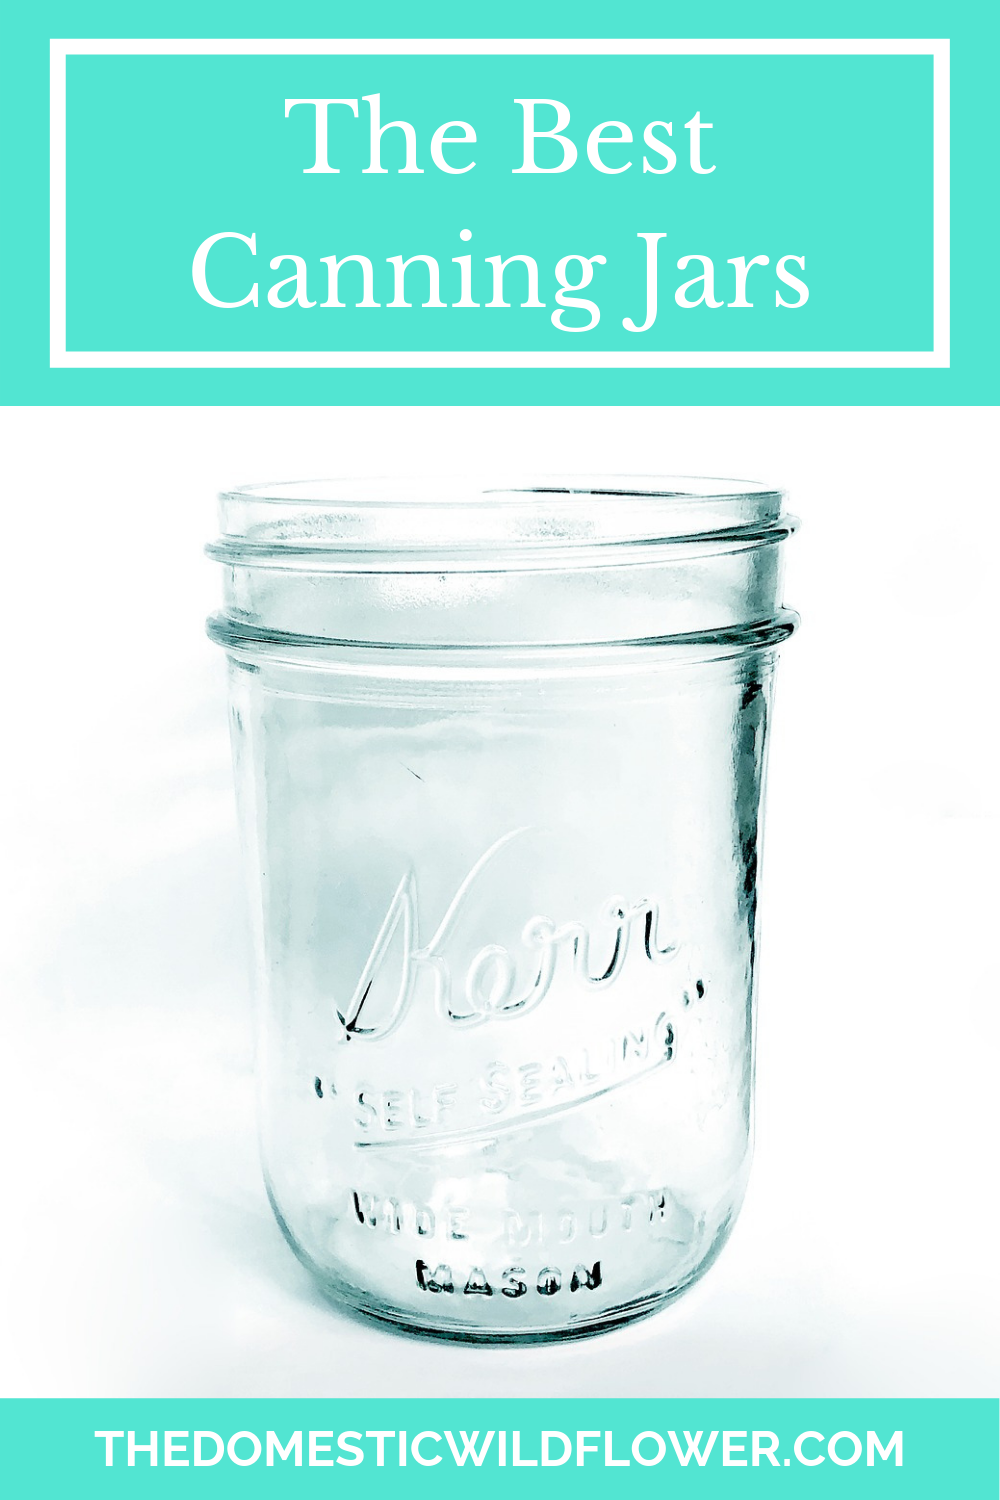 https://thedomesticwildflower.com/wp-content/uploads/2019/06/Domestic-Wildflower-best-canning-jars-1.png